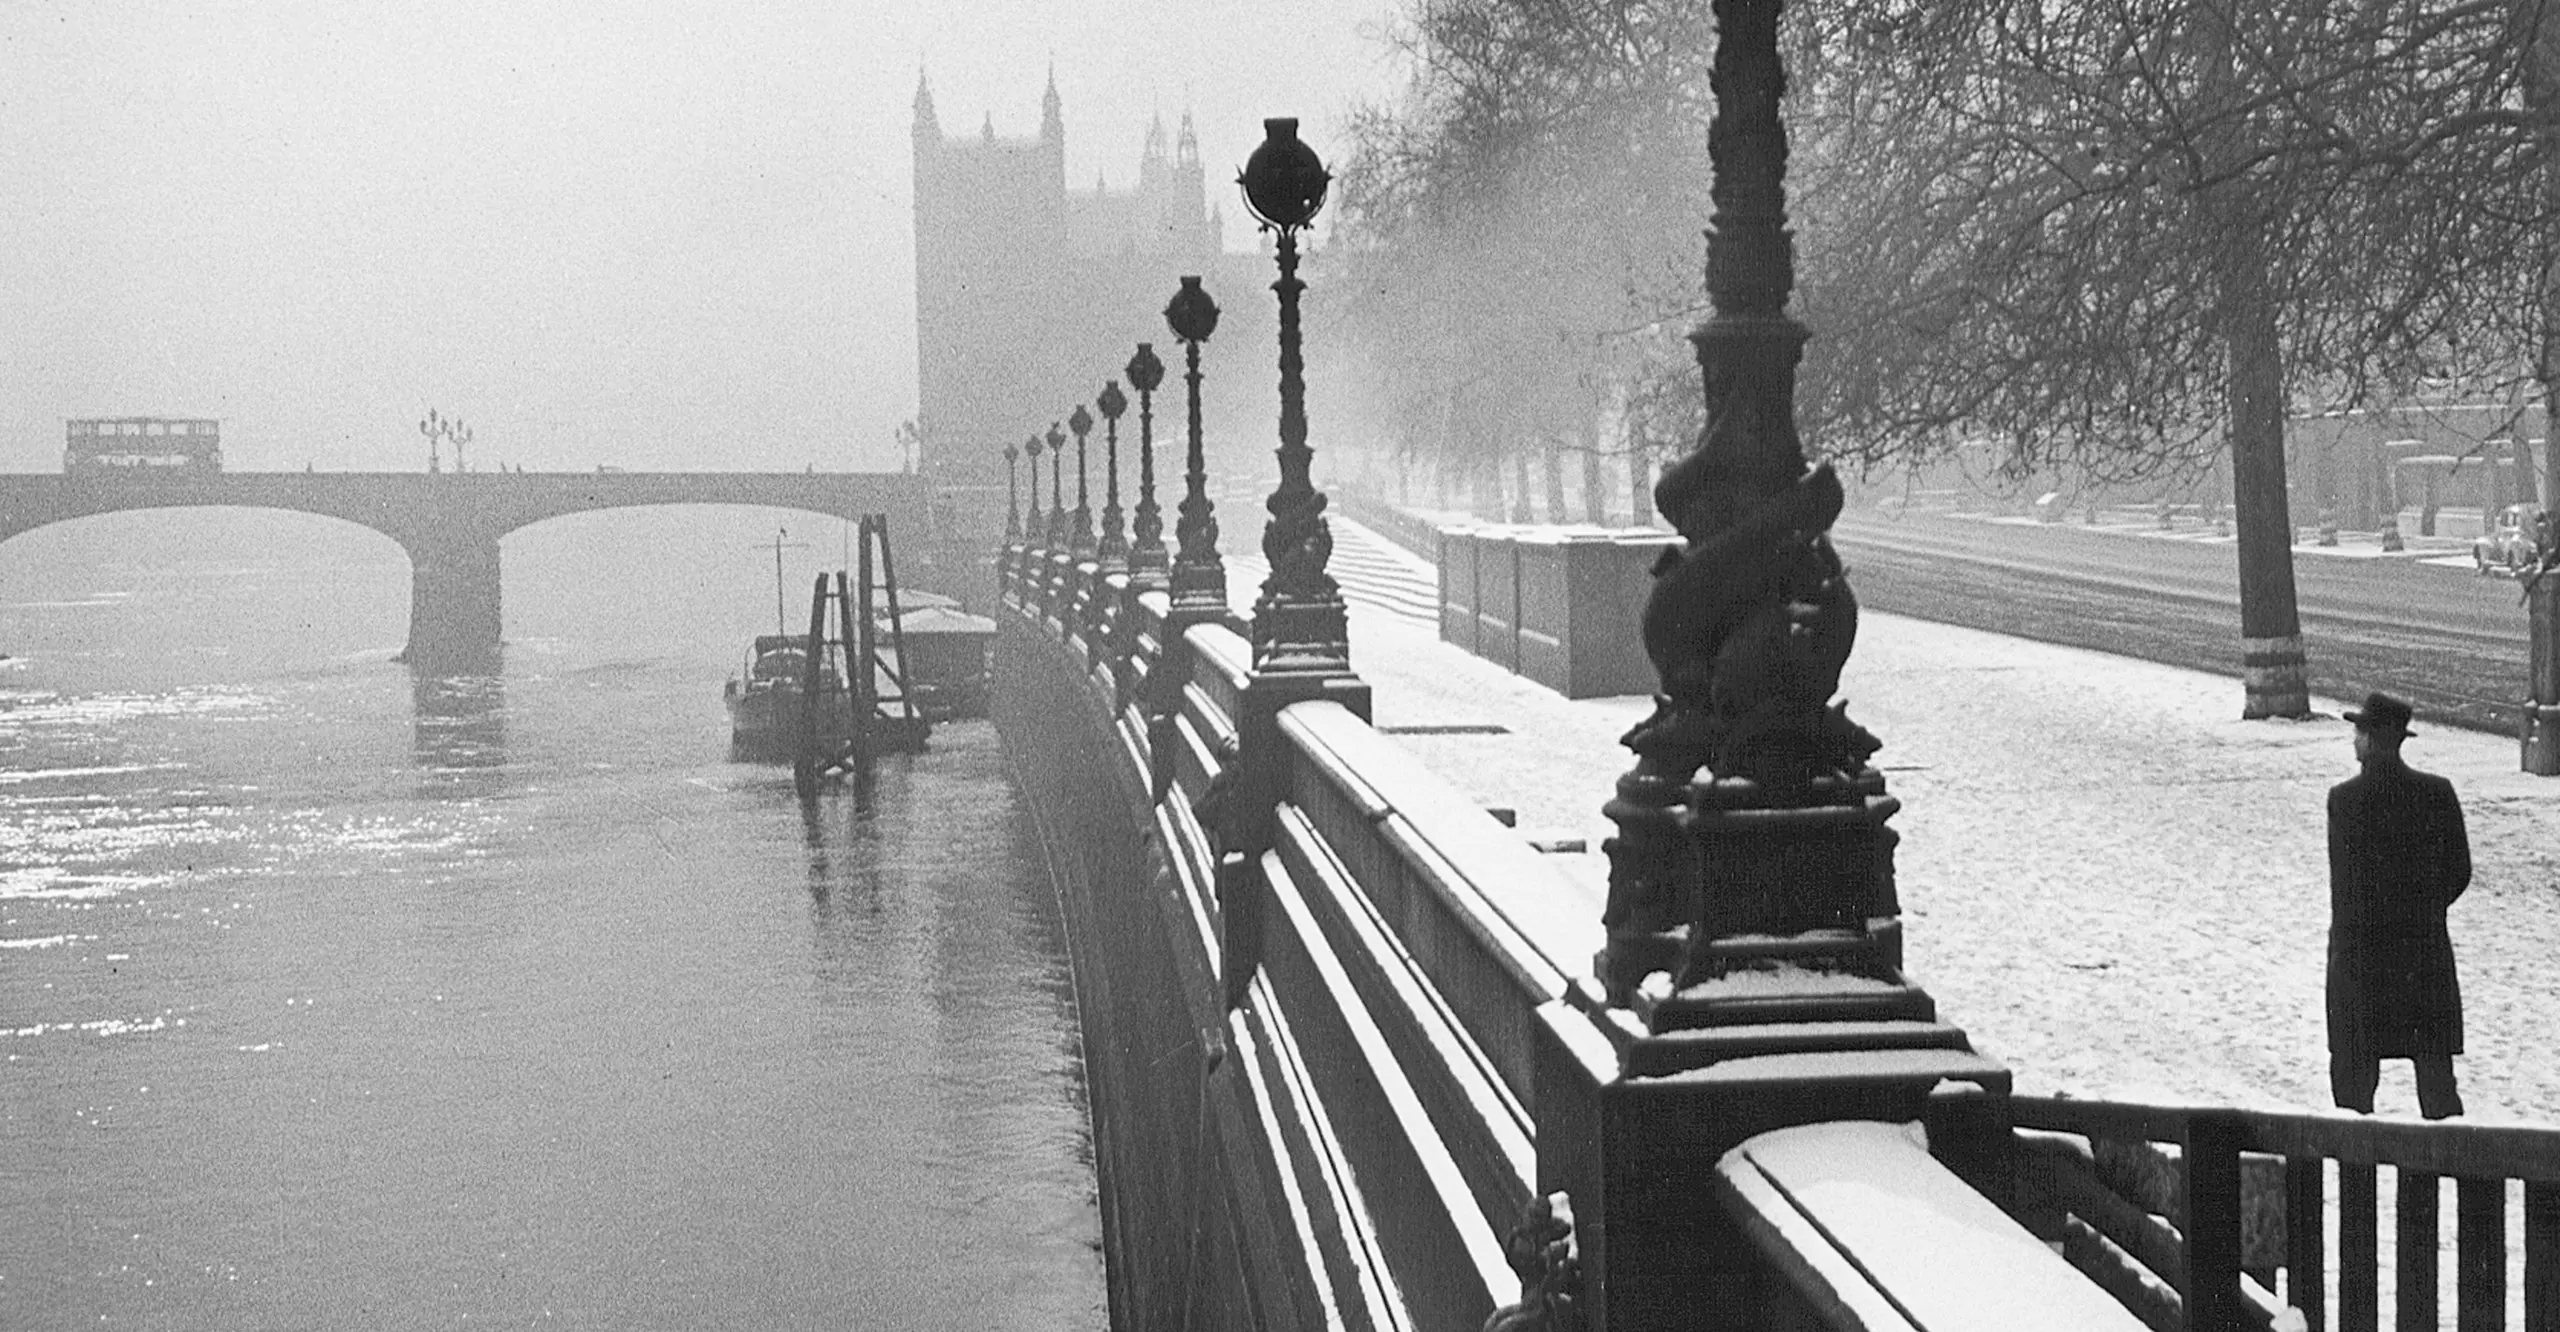 Black & white snowy scene of London's Embankment in the 40s with a man in a hat walking along the bank